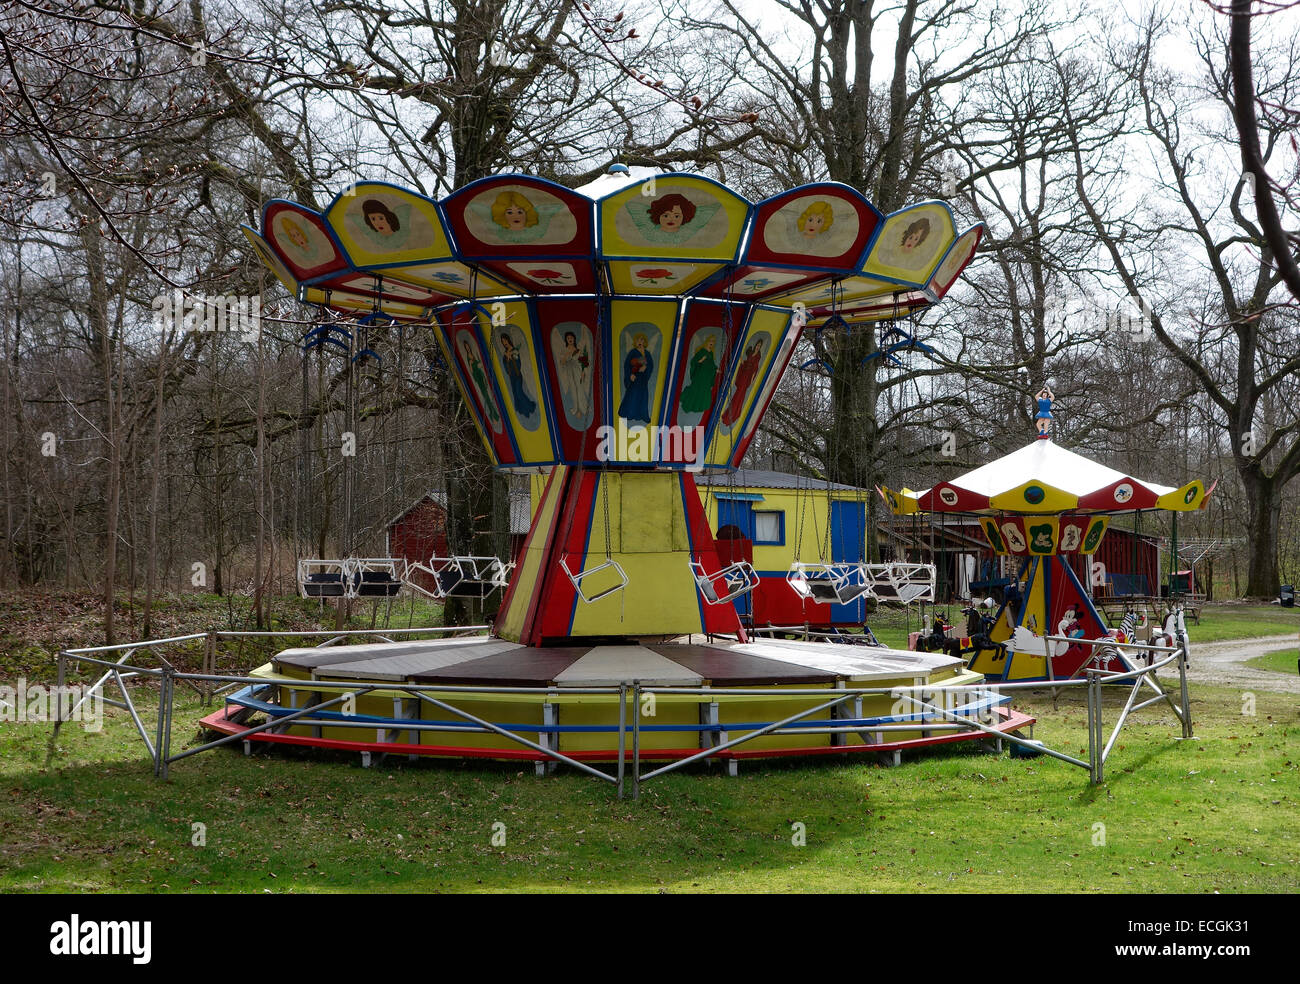 Old Carousel. Merry-go-round in Swedish countryside Stock Photo